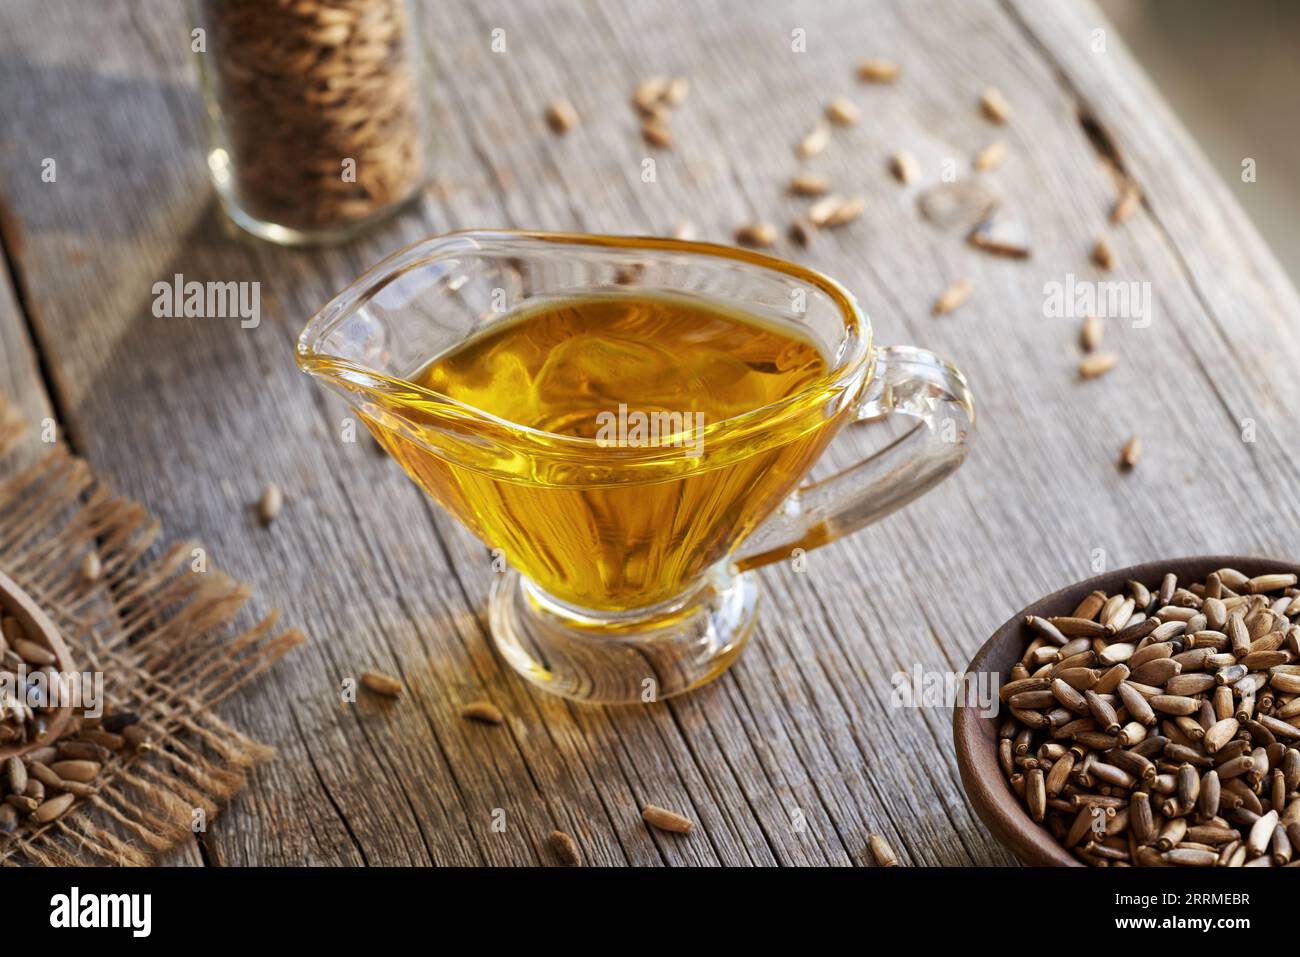 A jug of milk thistle oil with Carduus marianus seeds on a wooden table Stock Photo